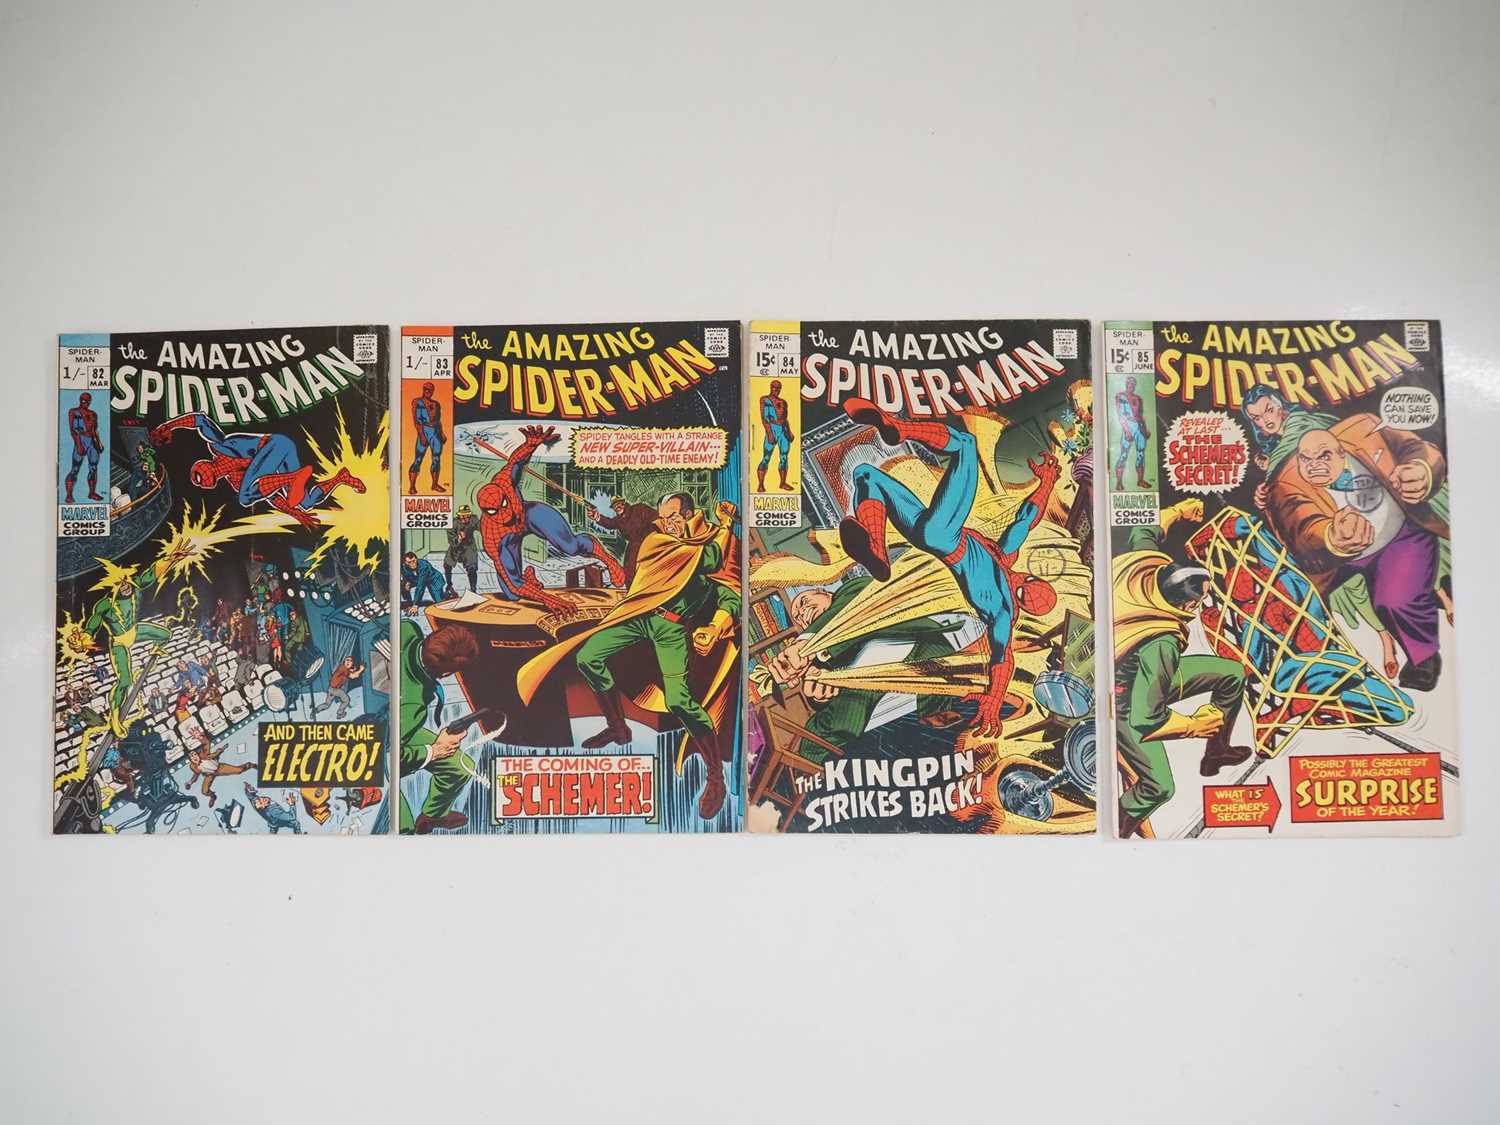 AMAZING SPIDER-MAN #82, 83, 84, 85 (4 in Lot) - (1970 - MARVEL - US & UK Price Variant) - Includes